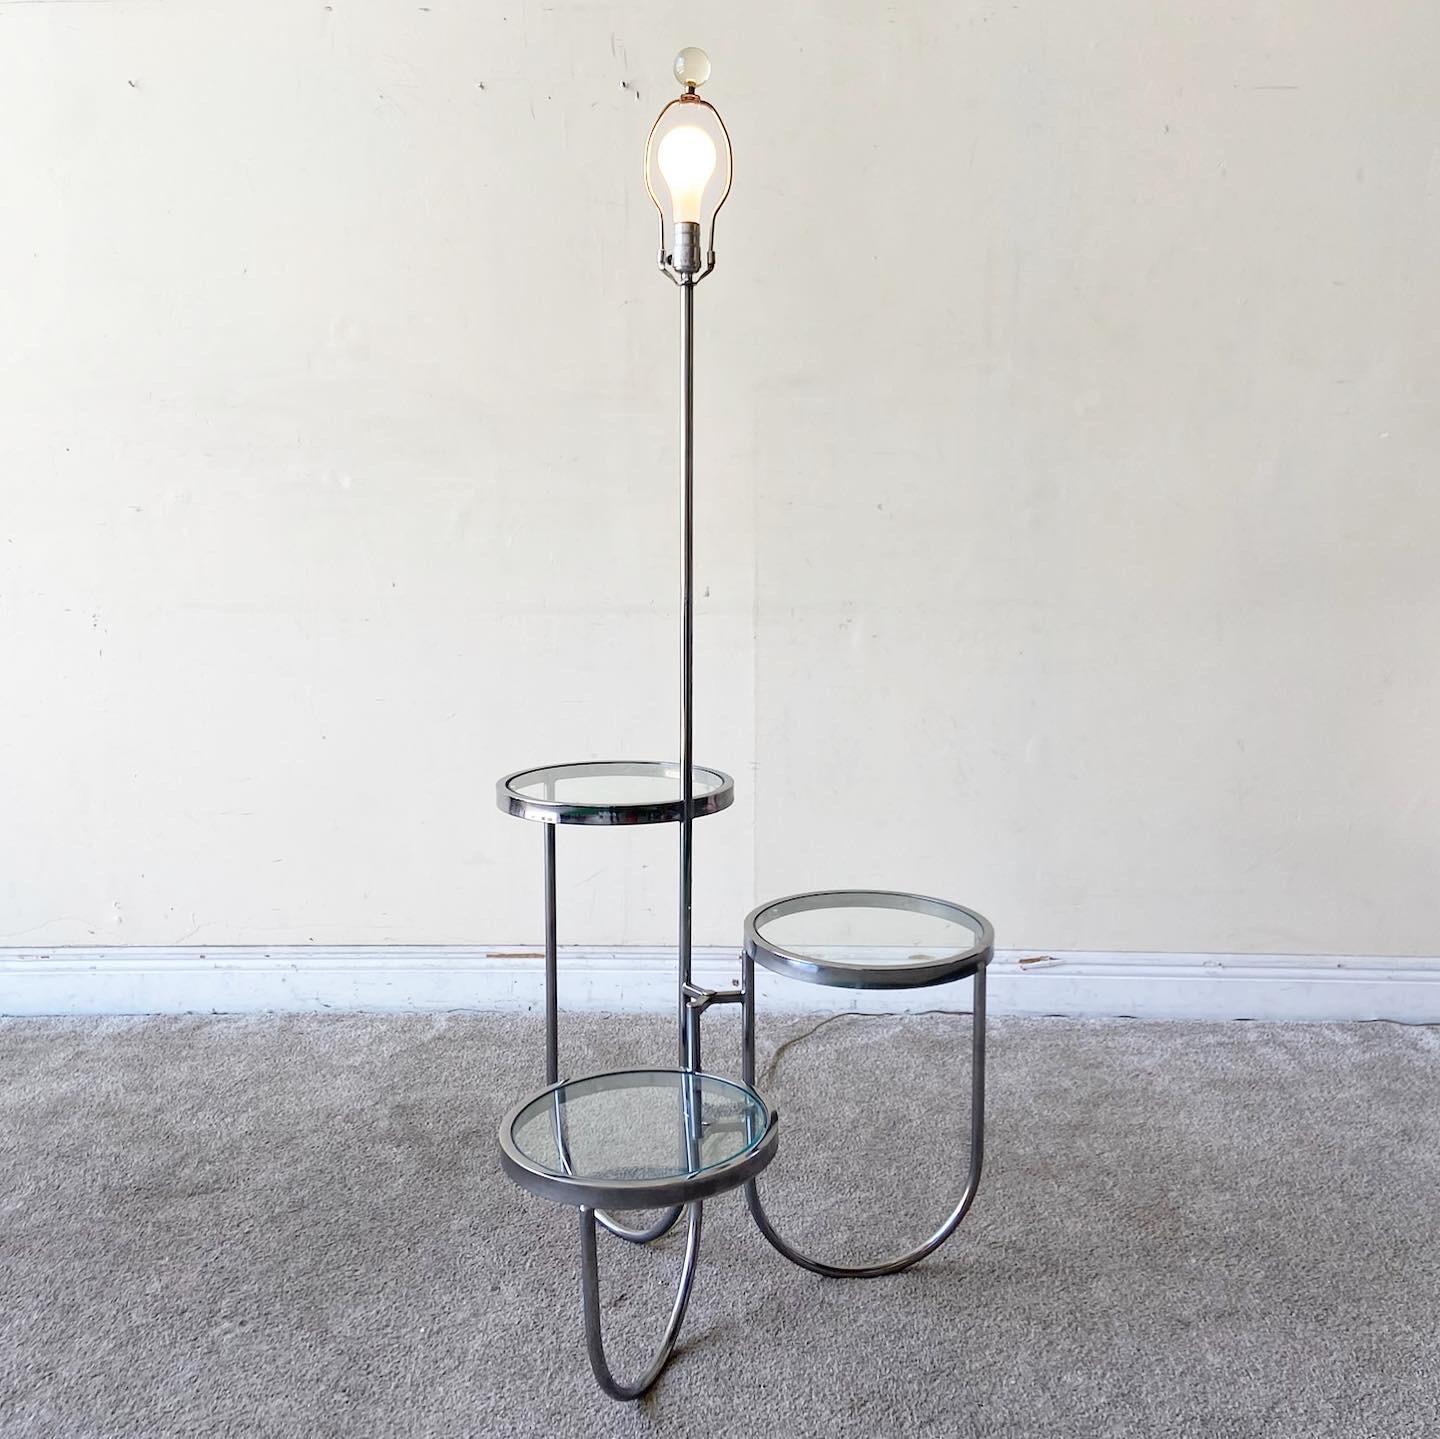 Exceptional chrome Mid-Century Modern floor lamp. Base of floor lamp is comprised of 3 circular tables ascending in circumscription of the lamp pole.

3 way lighting

Each table measures 12” D
Heights are 12”, 18”, 24.5” respectively.